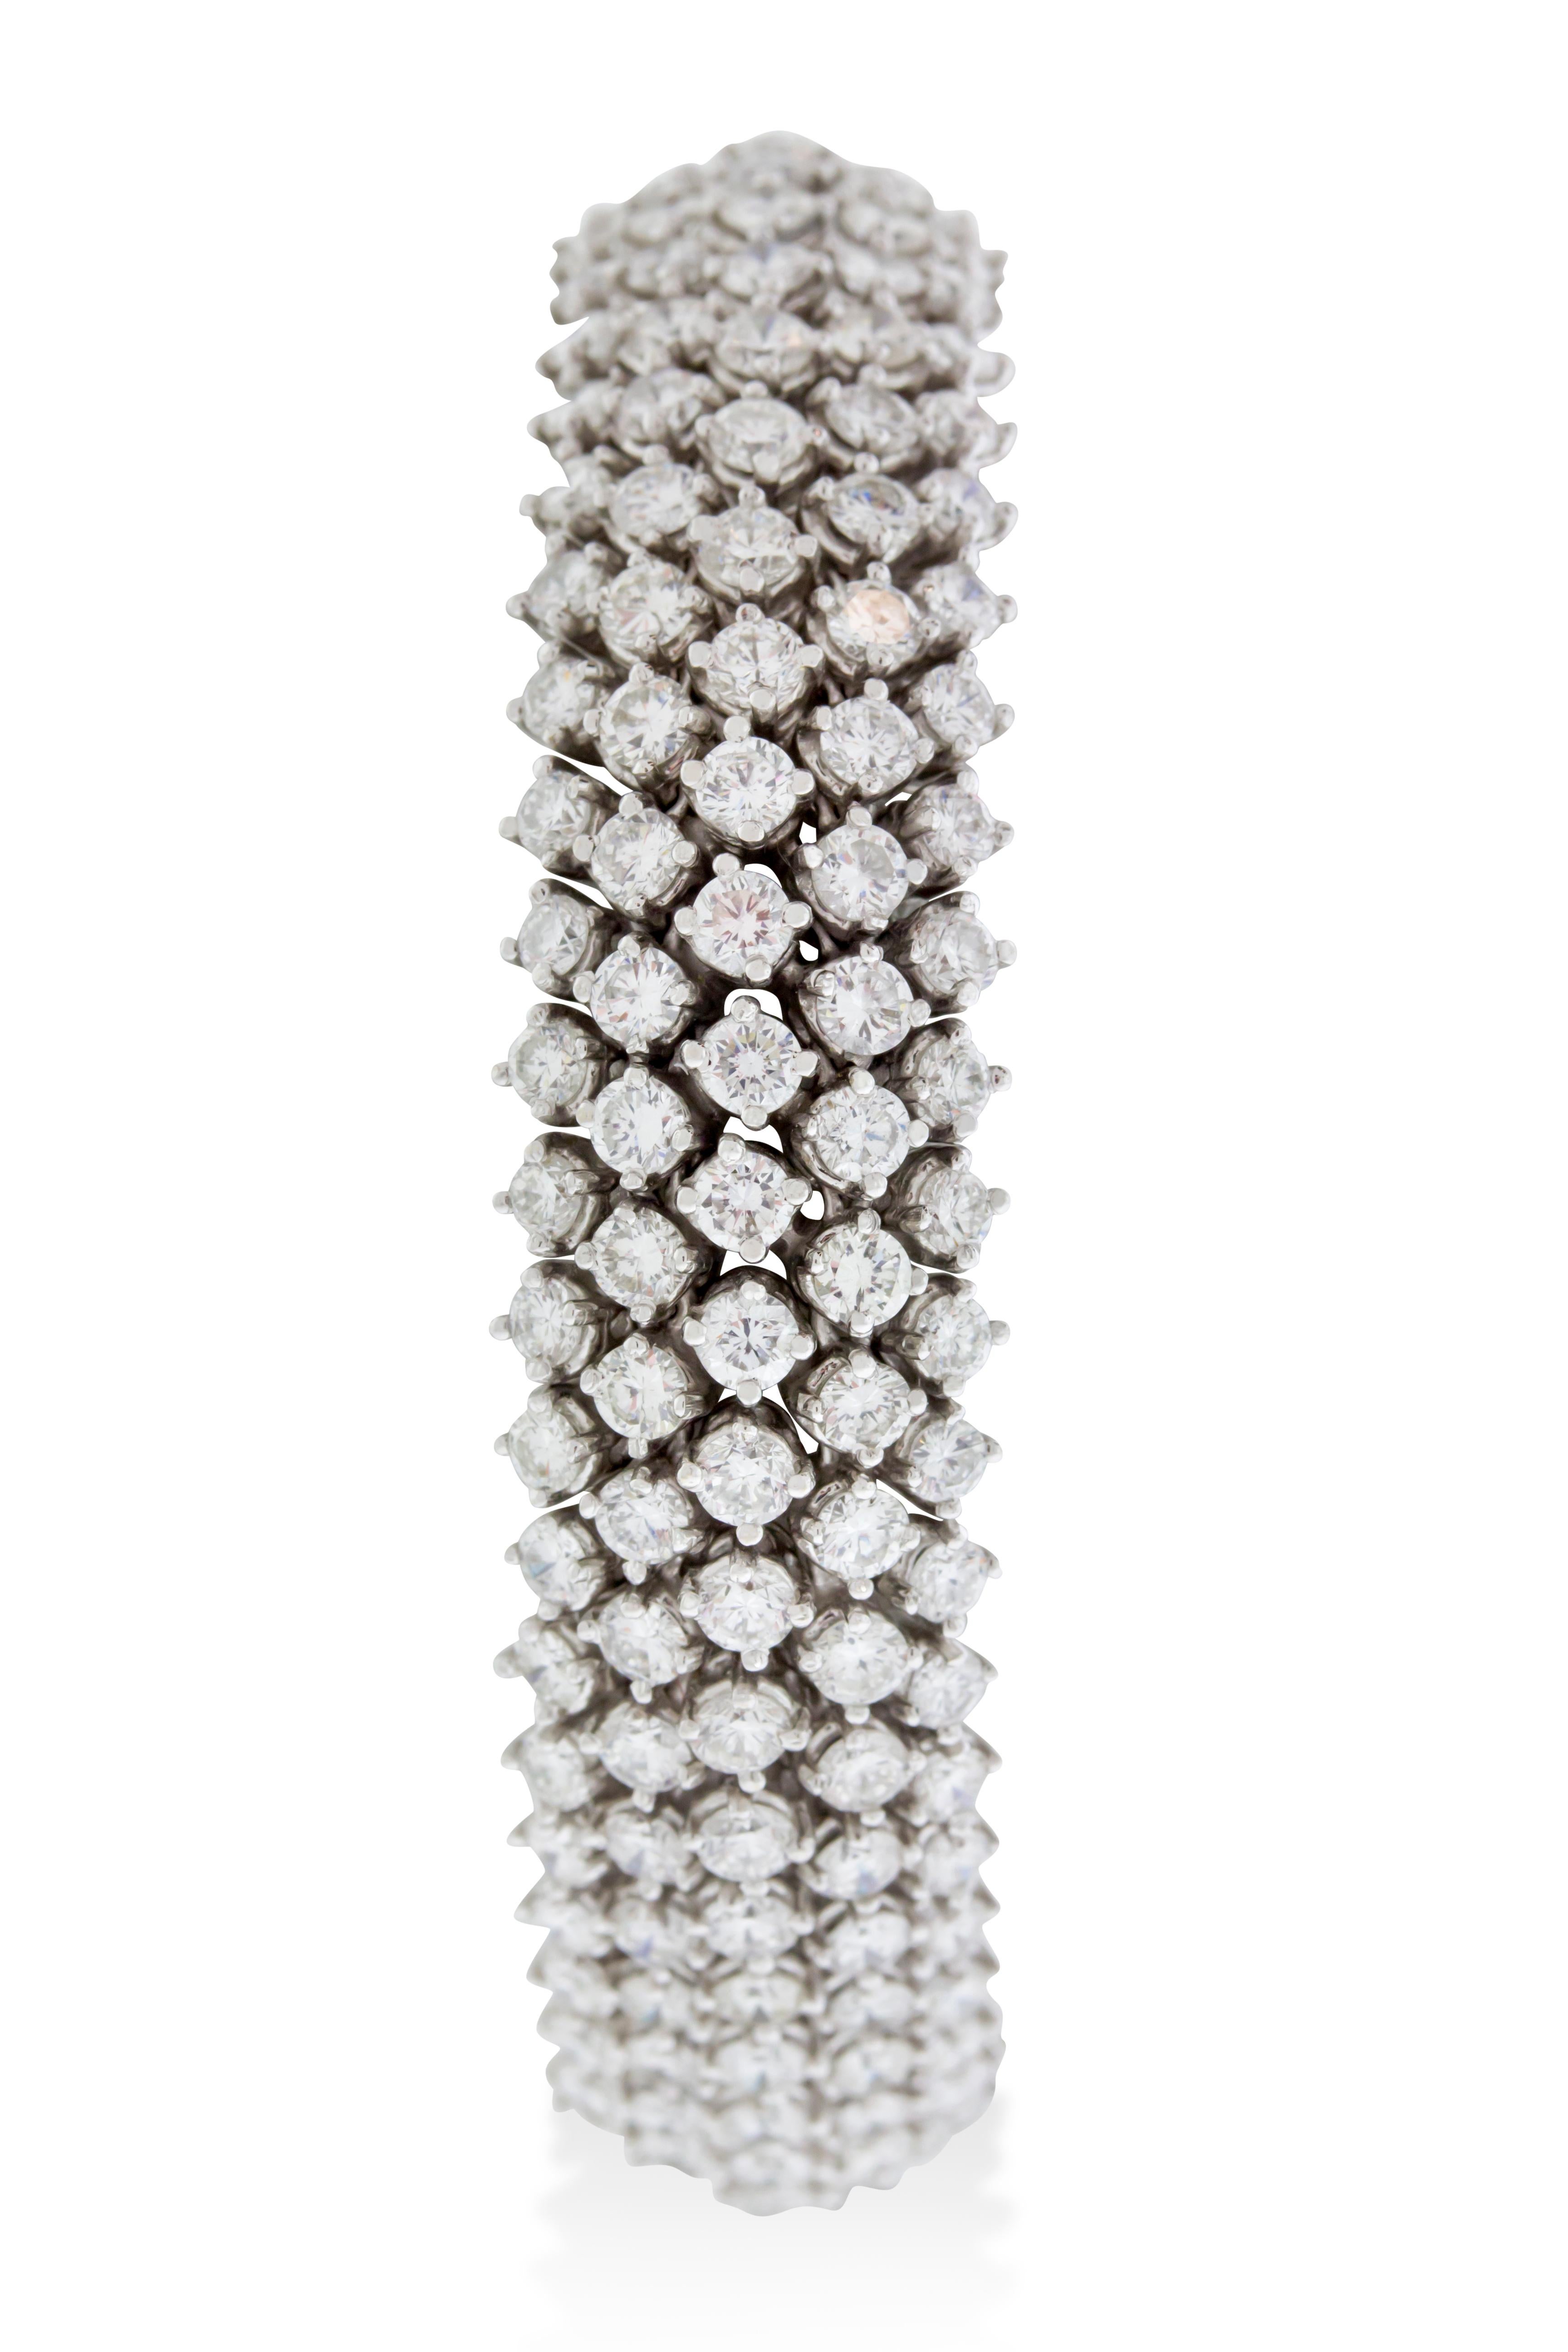 This tennis bracelet features five rows of G VS round diamonds set in white gold weighing 48.6 grams. 250 diamonds. 7 inch length. Made in Italy.

Resizing available upon request.

Viewings available in our NYC showroom by appointment.